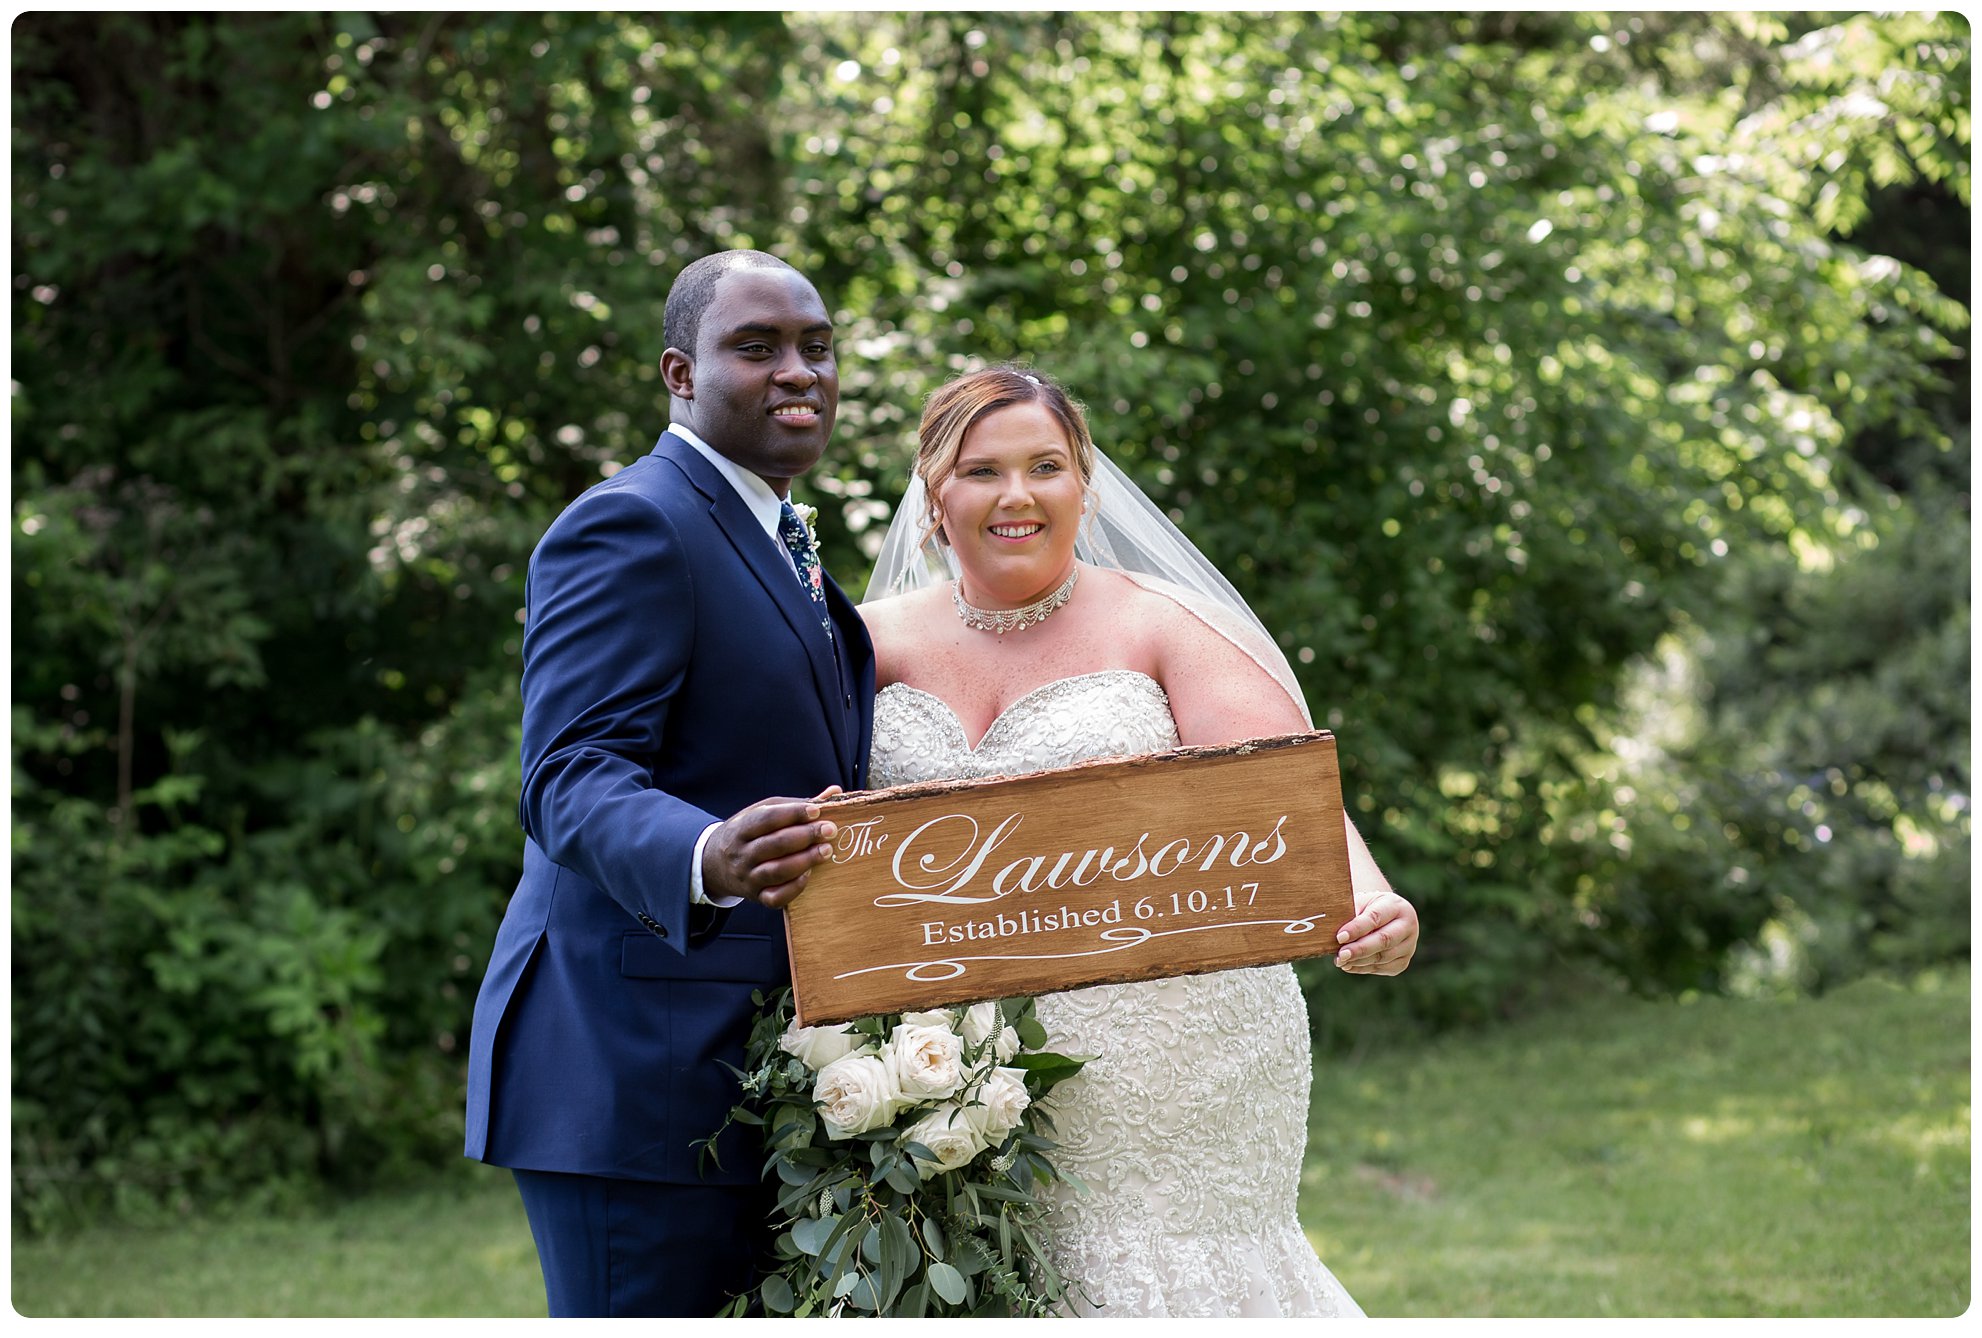 Nashville wedding at Iriswoods, Southern Belles and Blooms, navy tuxedo, whimsical garden wedding, southern wedding, southern bride, nashville bride, melanie grady photography, the best nashville wedding photographer, interracial couple wedding, mt juliet, 